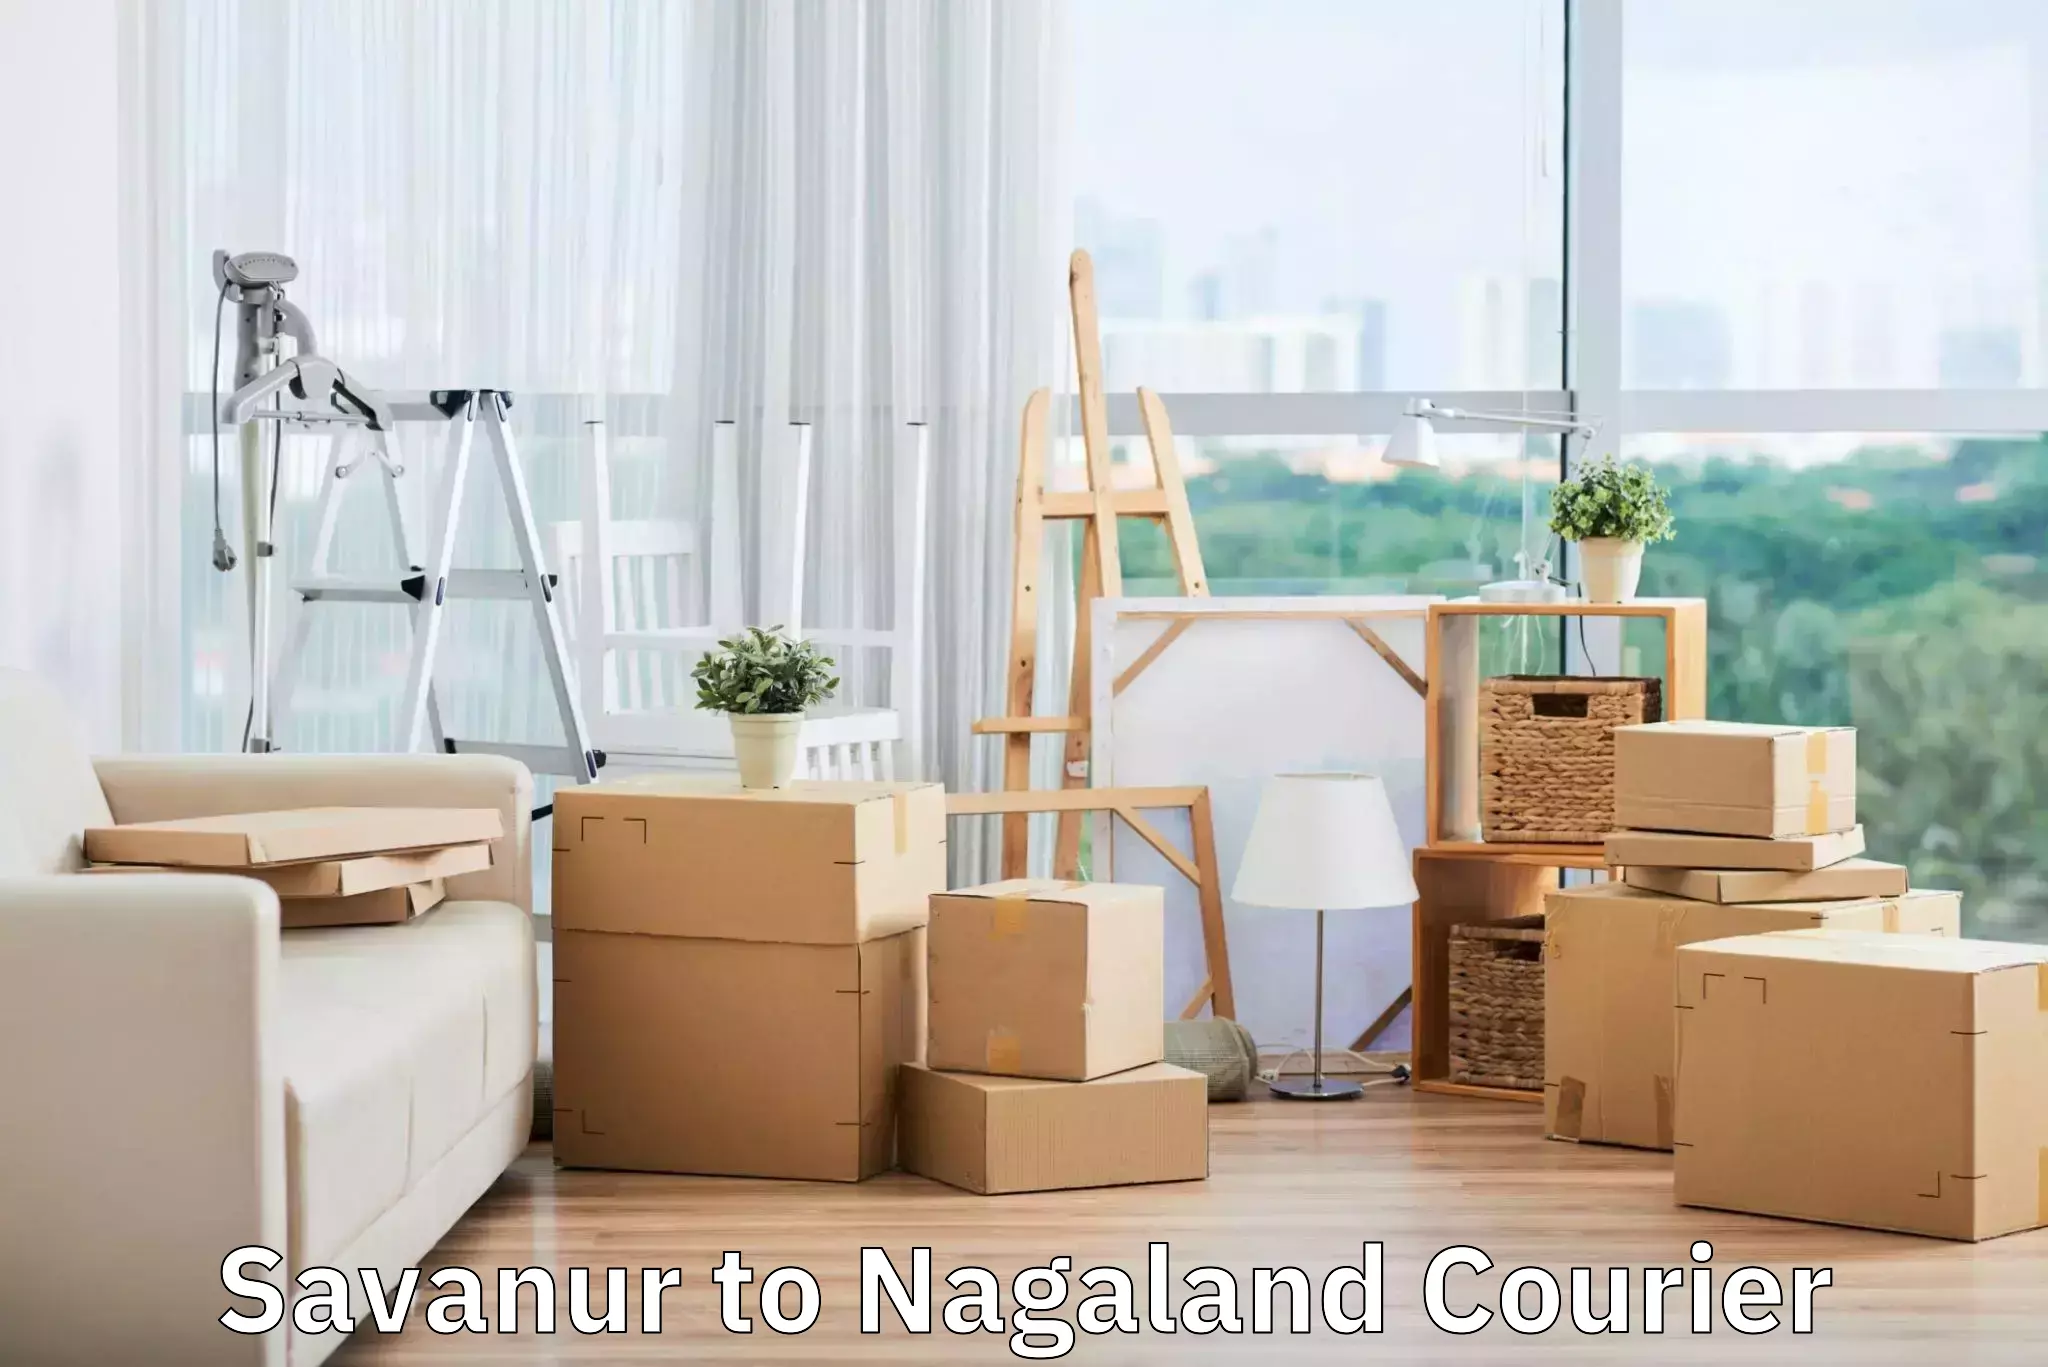 Luggage delivery network Savanur to Nagaland